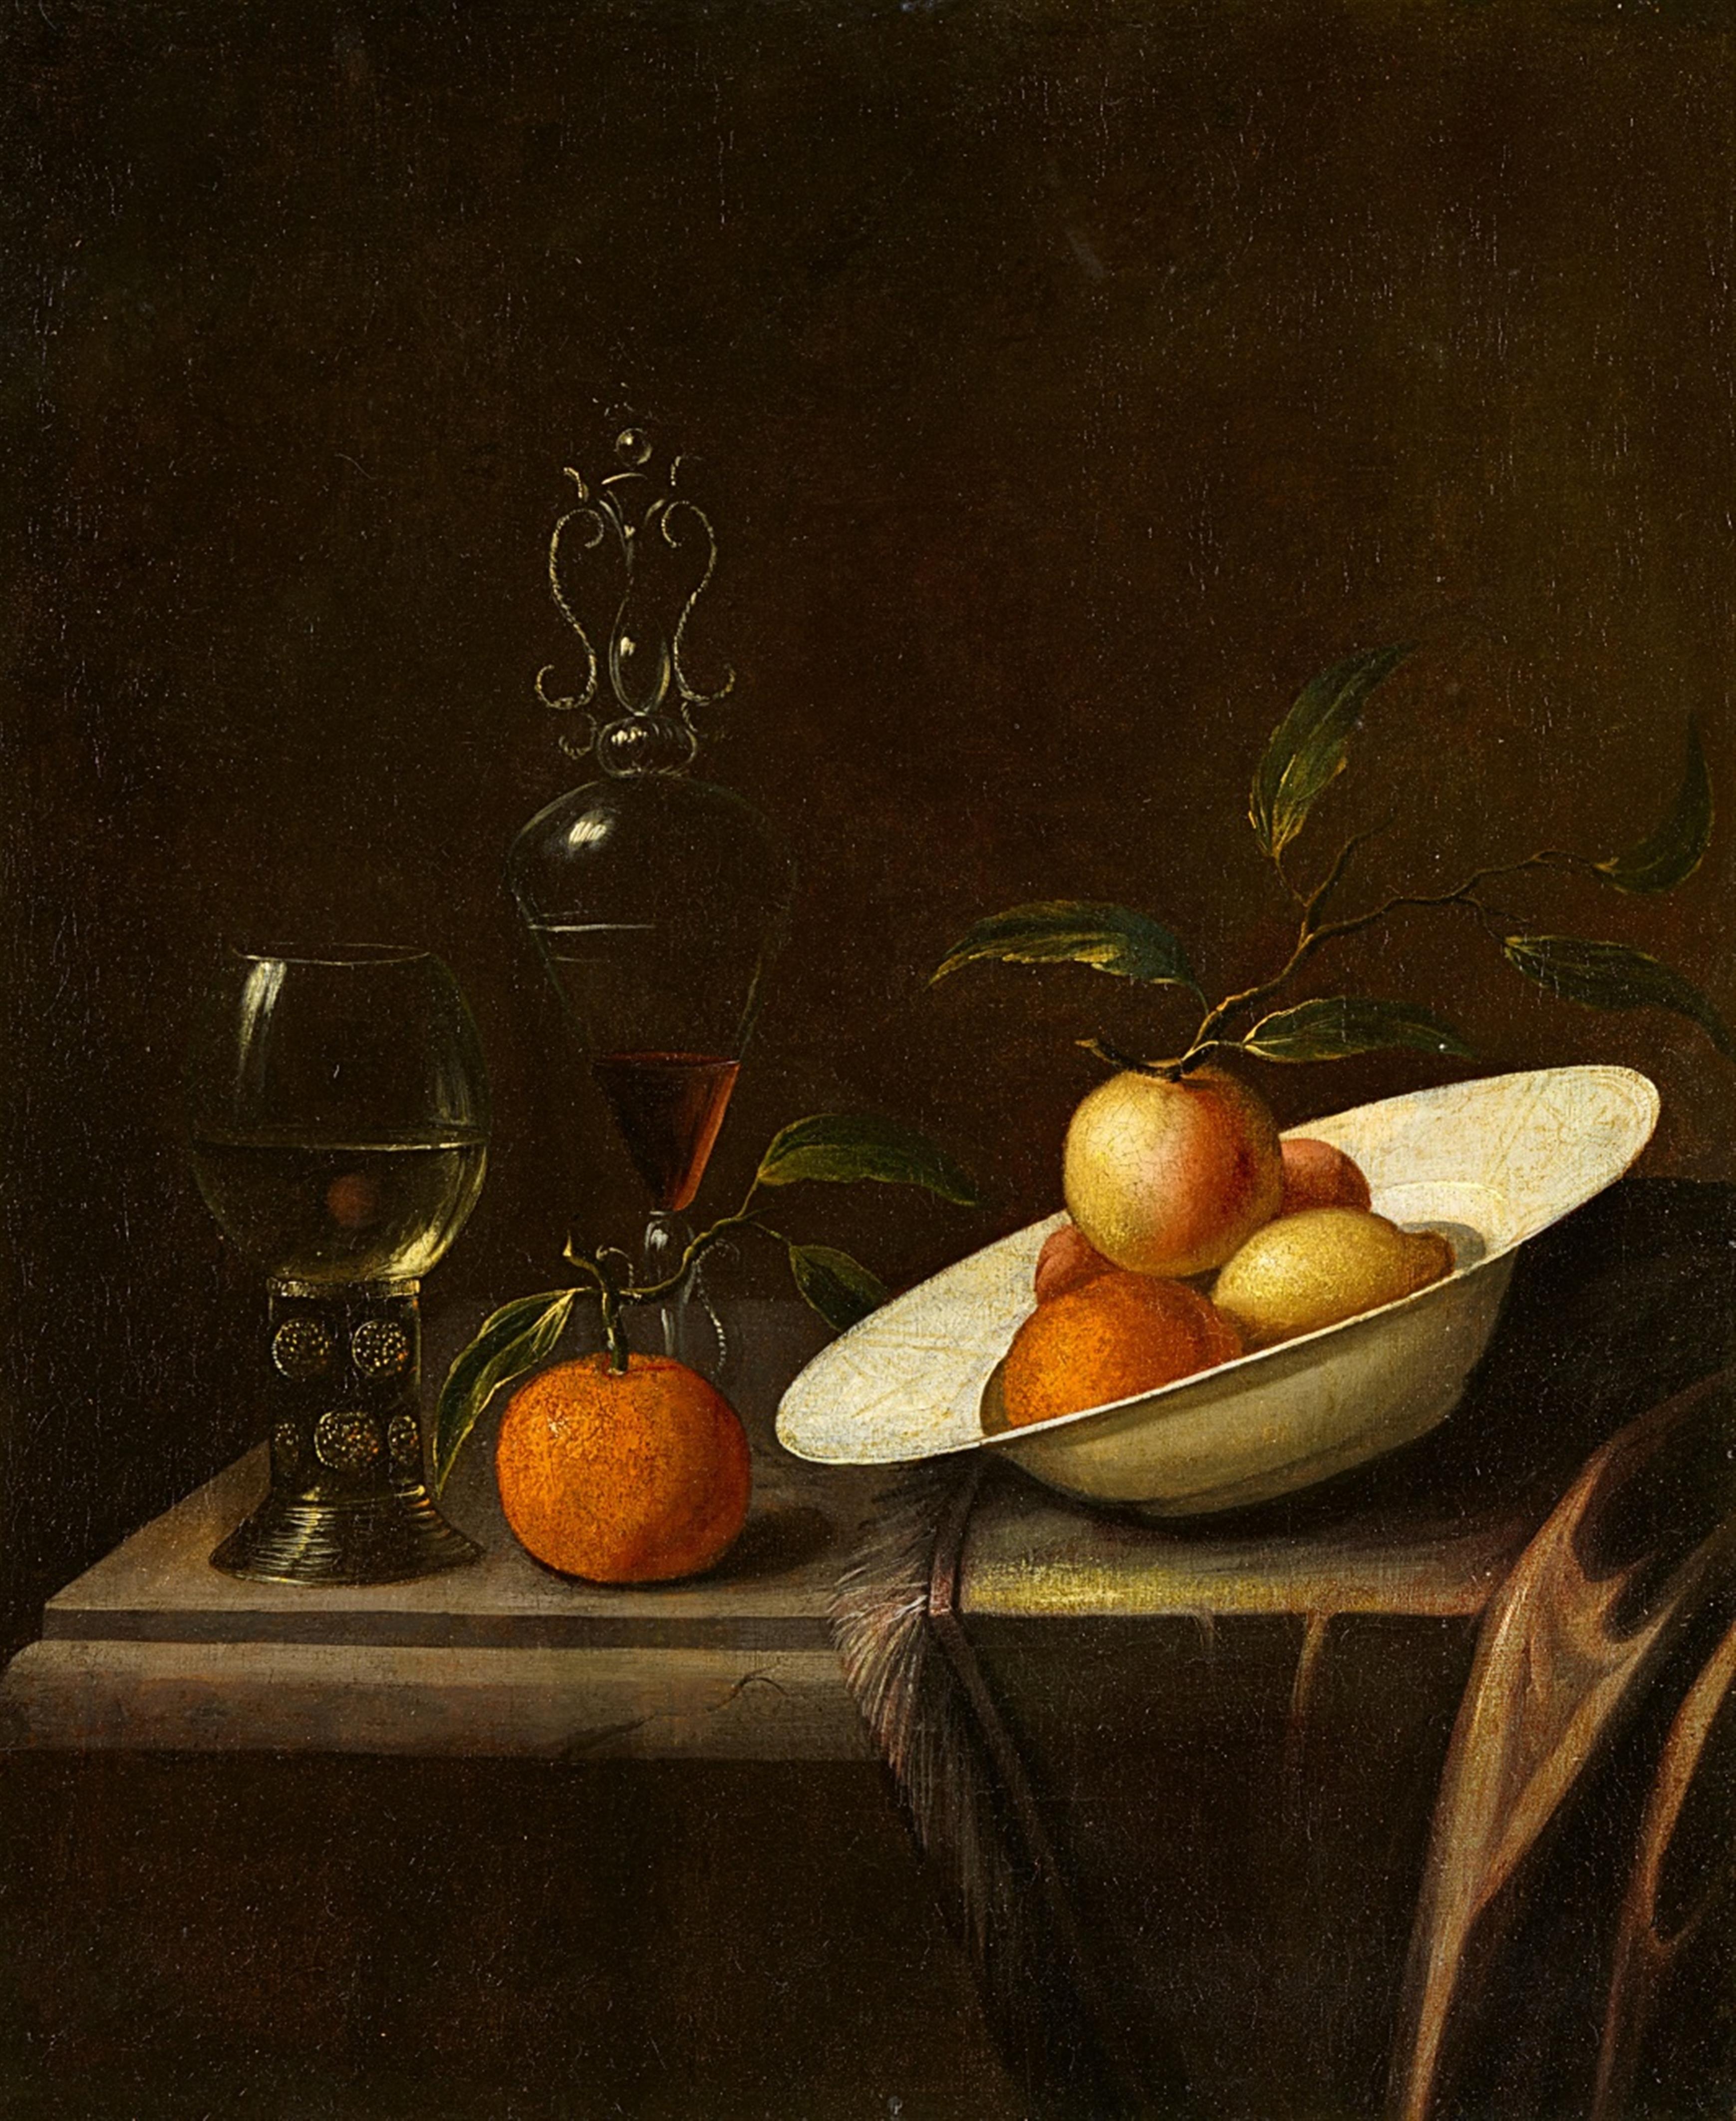 Netherlandish School 17th century - Still Life with Fruit, a Rummer, and a Glass Goblet - image-1